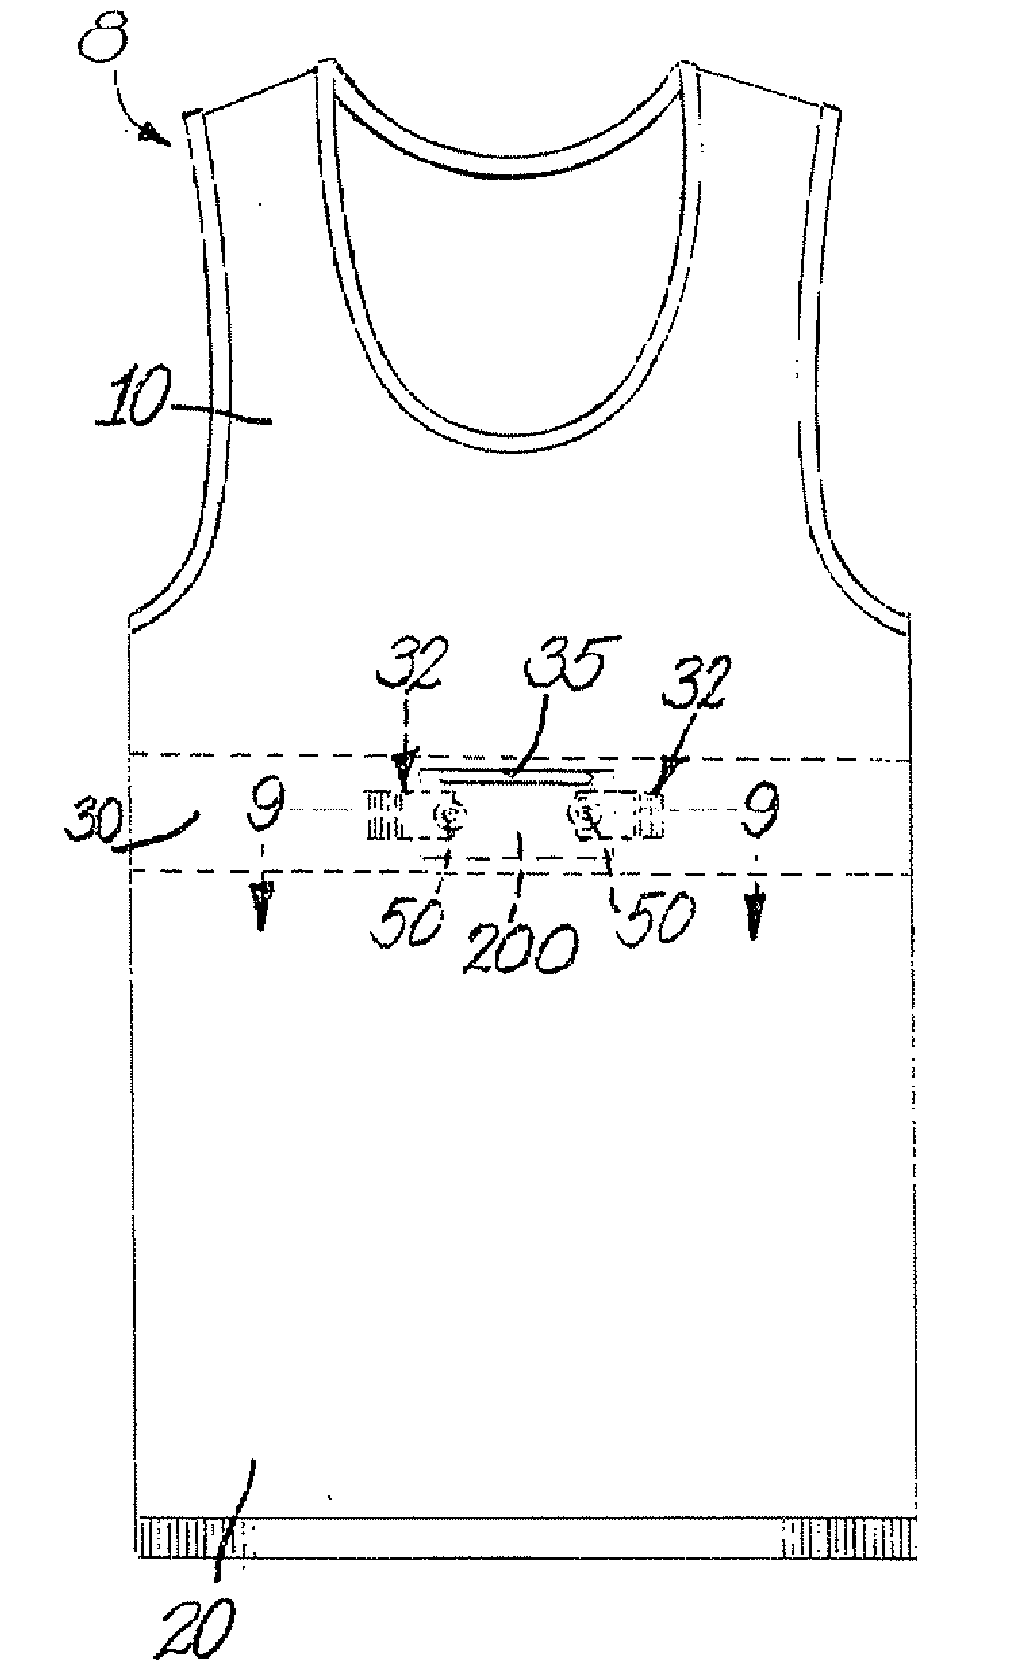 Wearable article with band portion adapted to include textile-based electrodes and method of making such article